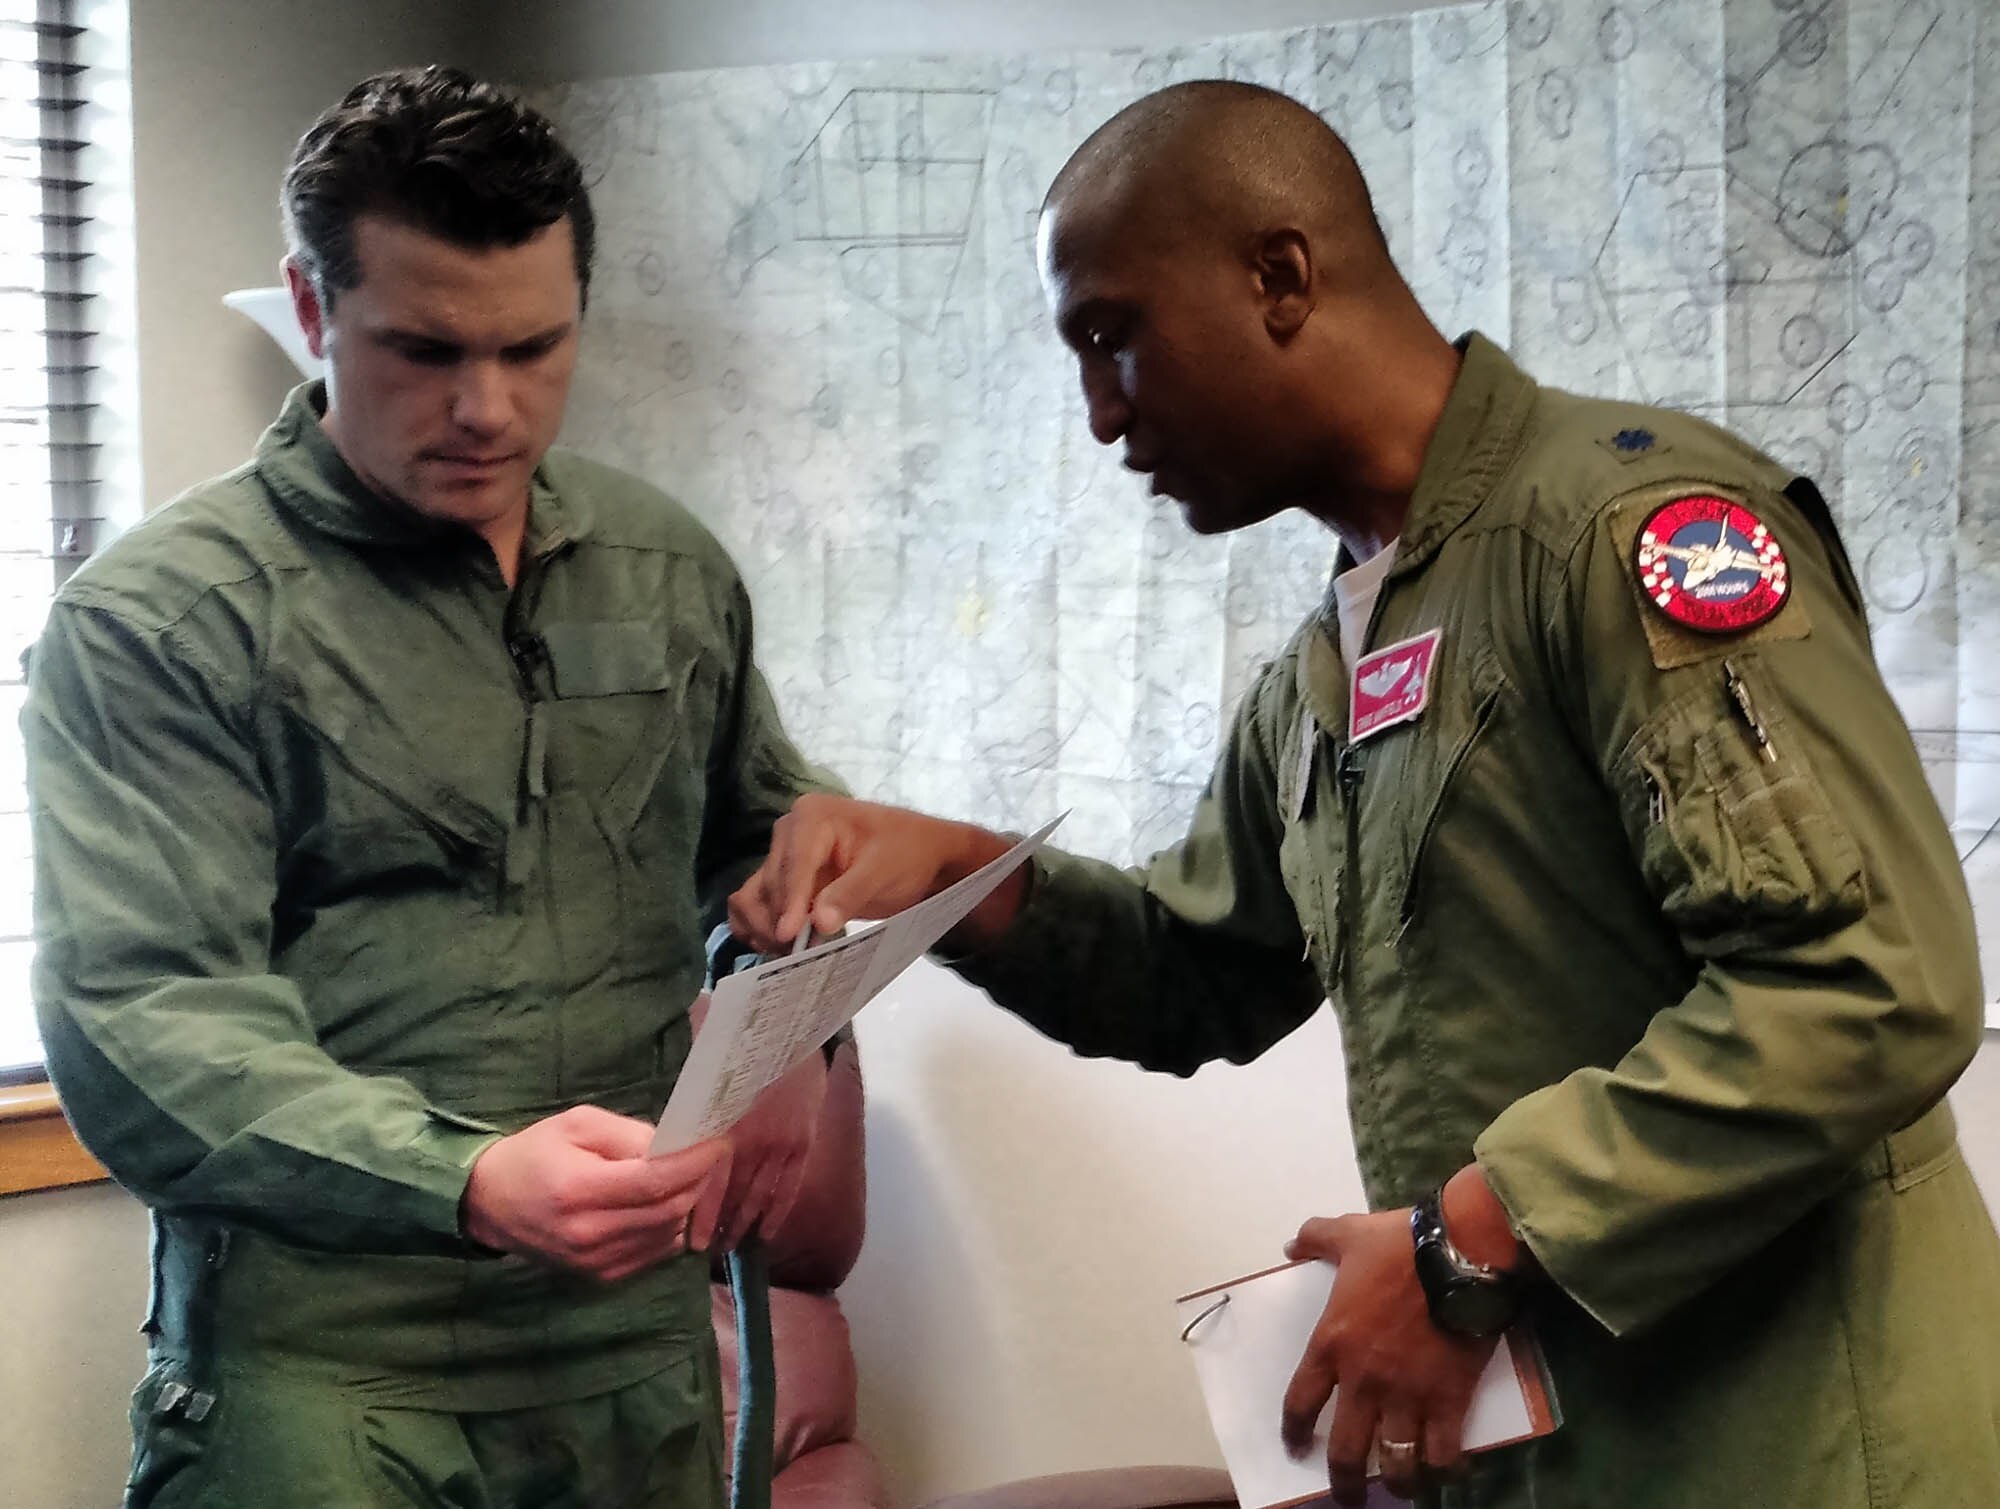 Peter Hegseth, Fox & Friends television news contributor, gets a mission brief from Lt. Col. Ernie Mayfield, Director of Operations, 138th Fighter Wing, Det. 1, prior to an aerospace defense familiarization flight Feb. 1 at Ellington Field Joint Reserve Base, Houston Texas. Hegseth flew with the unit as part of a Continental Aerospace Defense Region communications outreach plan to help enhance public knowledge about temporary flight restrictions during high-profile events such as Super Bowl LI. (Photo released by Mary McHale)